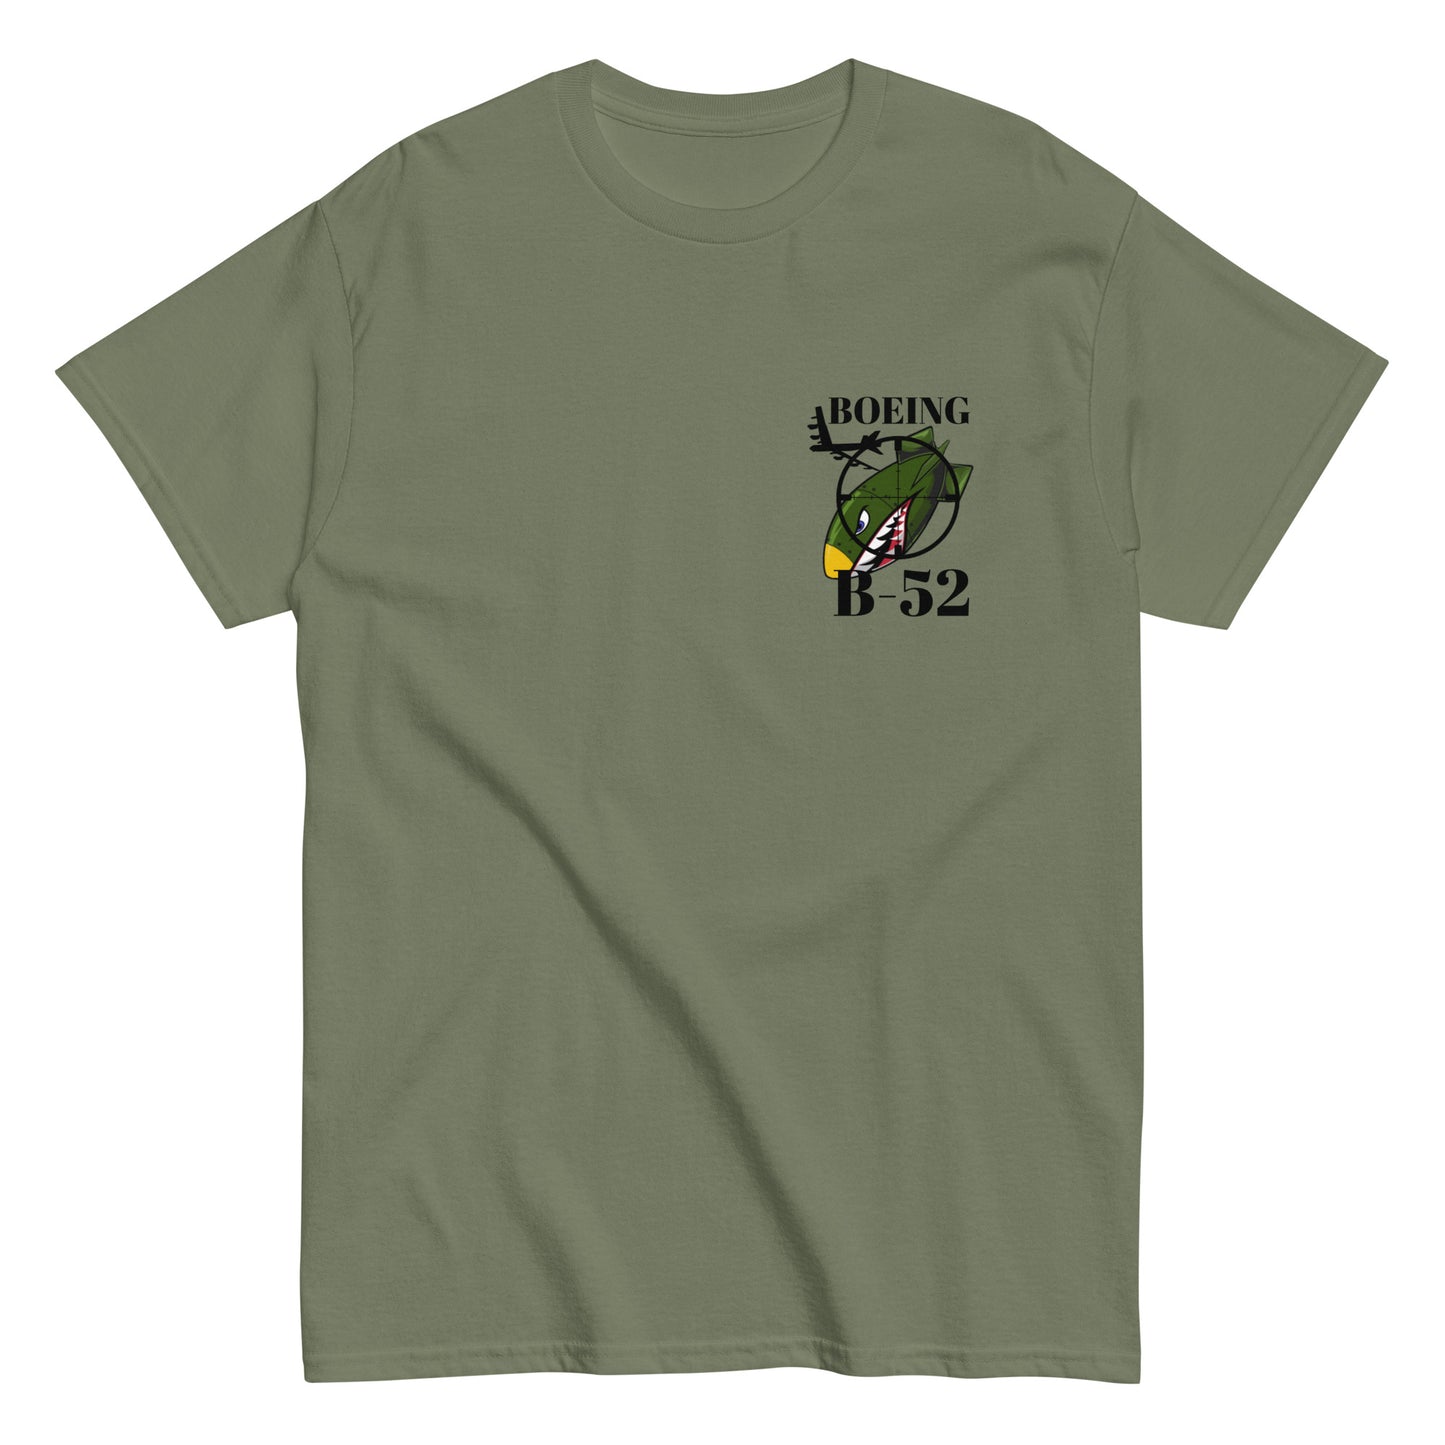 PUT SOME WAREHEADS ON FOREHEADS" USAF B-52 STRATOFORTRESS T-SHIRT